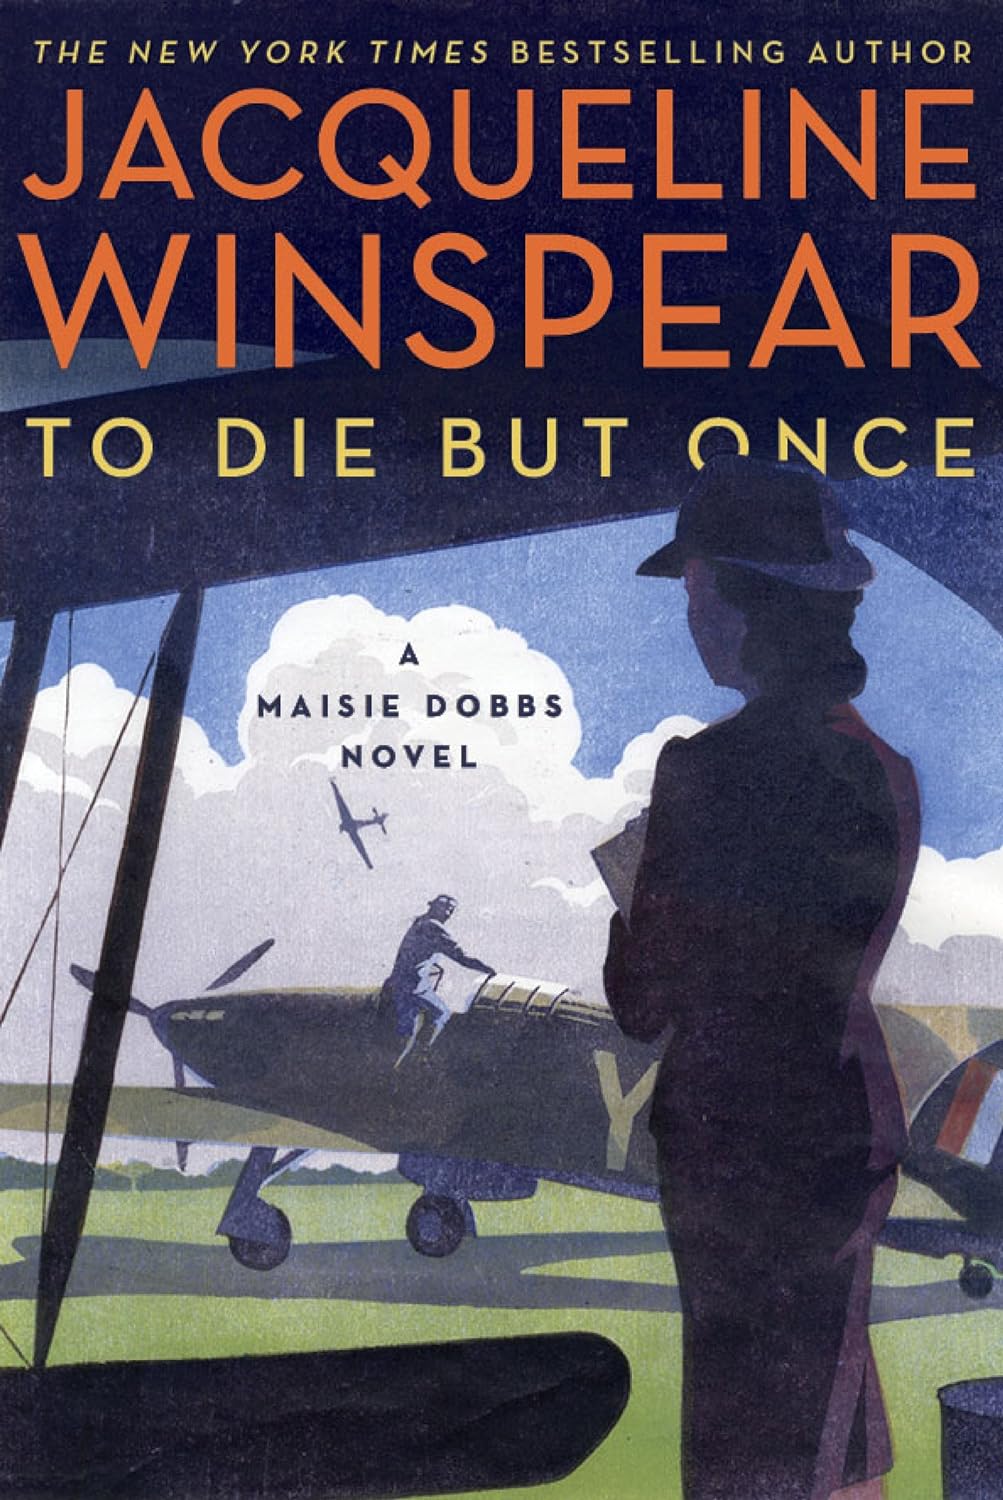 Image for "To Die but Once: A Maisie Dobbs Novel"